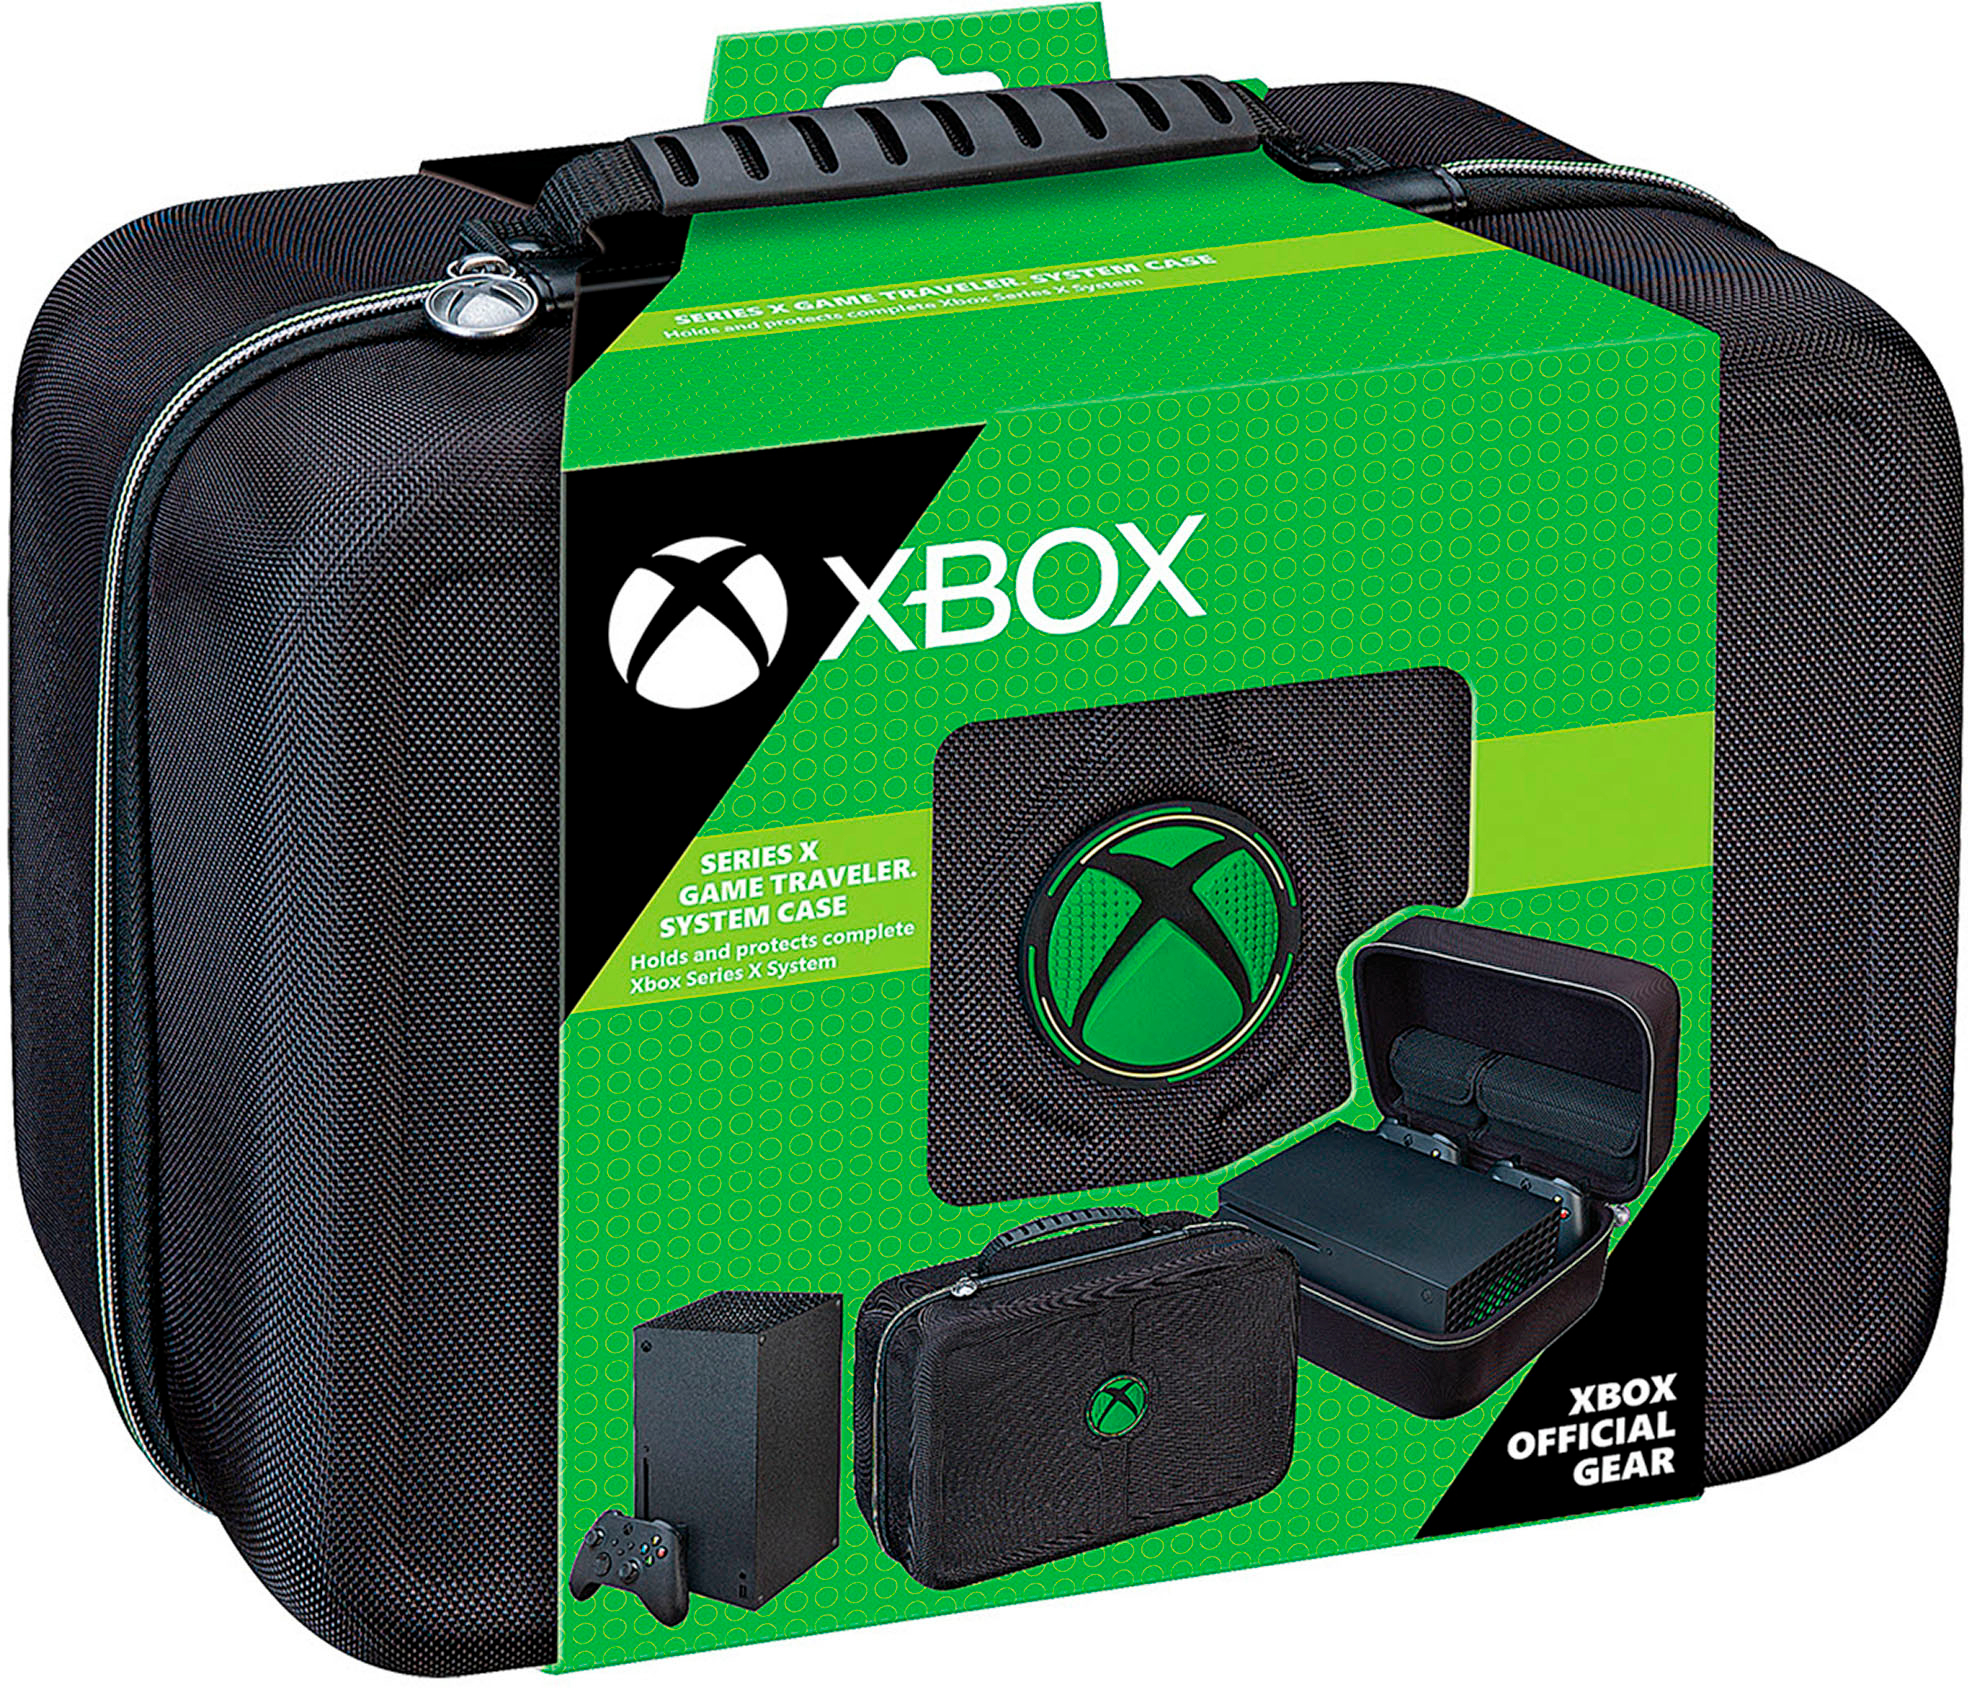 Hard Carrying Case for Xbox Series S Game Console and Wireless